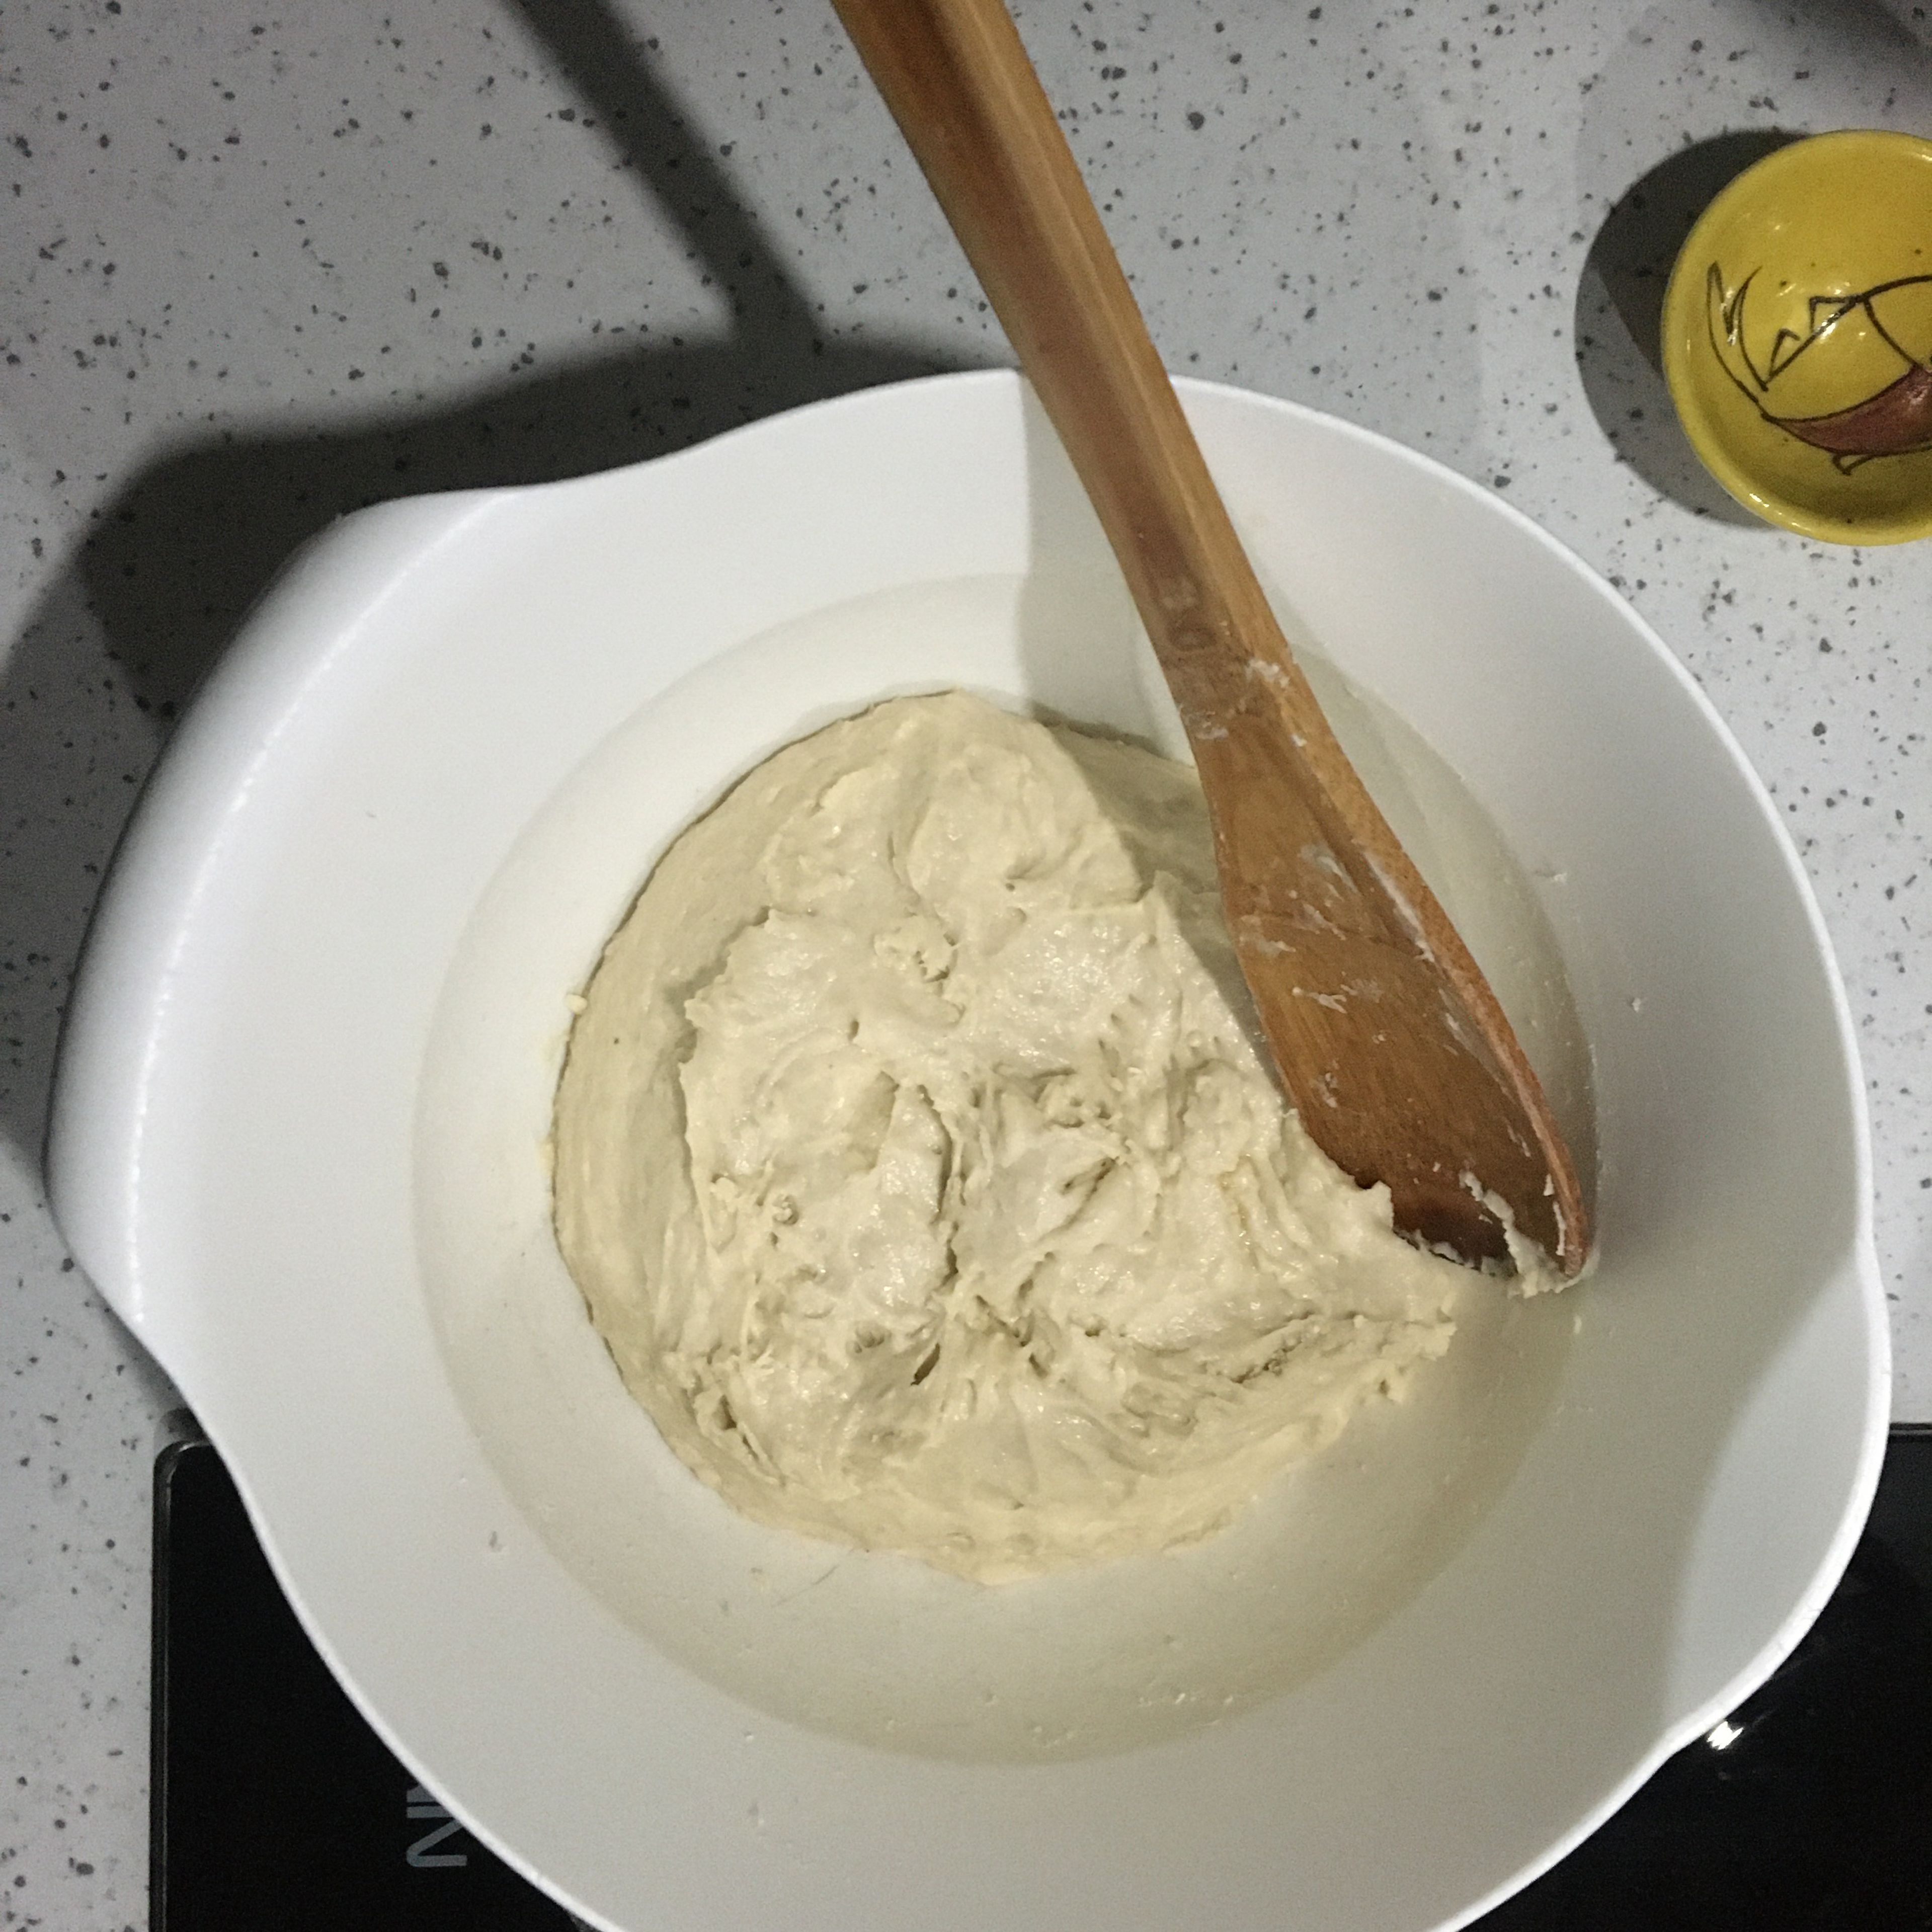 This bread is an overnight risen one, so the dough is being made the night before. In a large bowl, briefly whisk together the flour, wheat bran and oat flour. Add the yeast, date juice, water and salt incorporating all together with a wooden spoon until an even sticky yet smooth dough comes together.